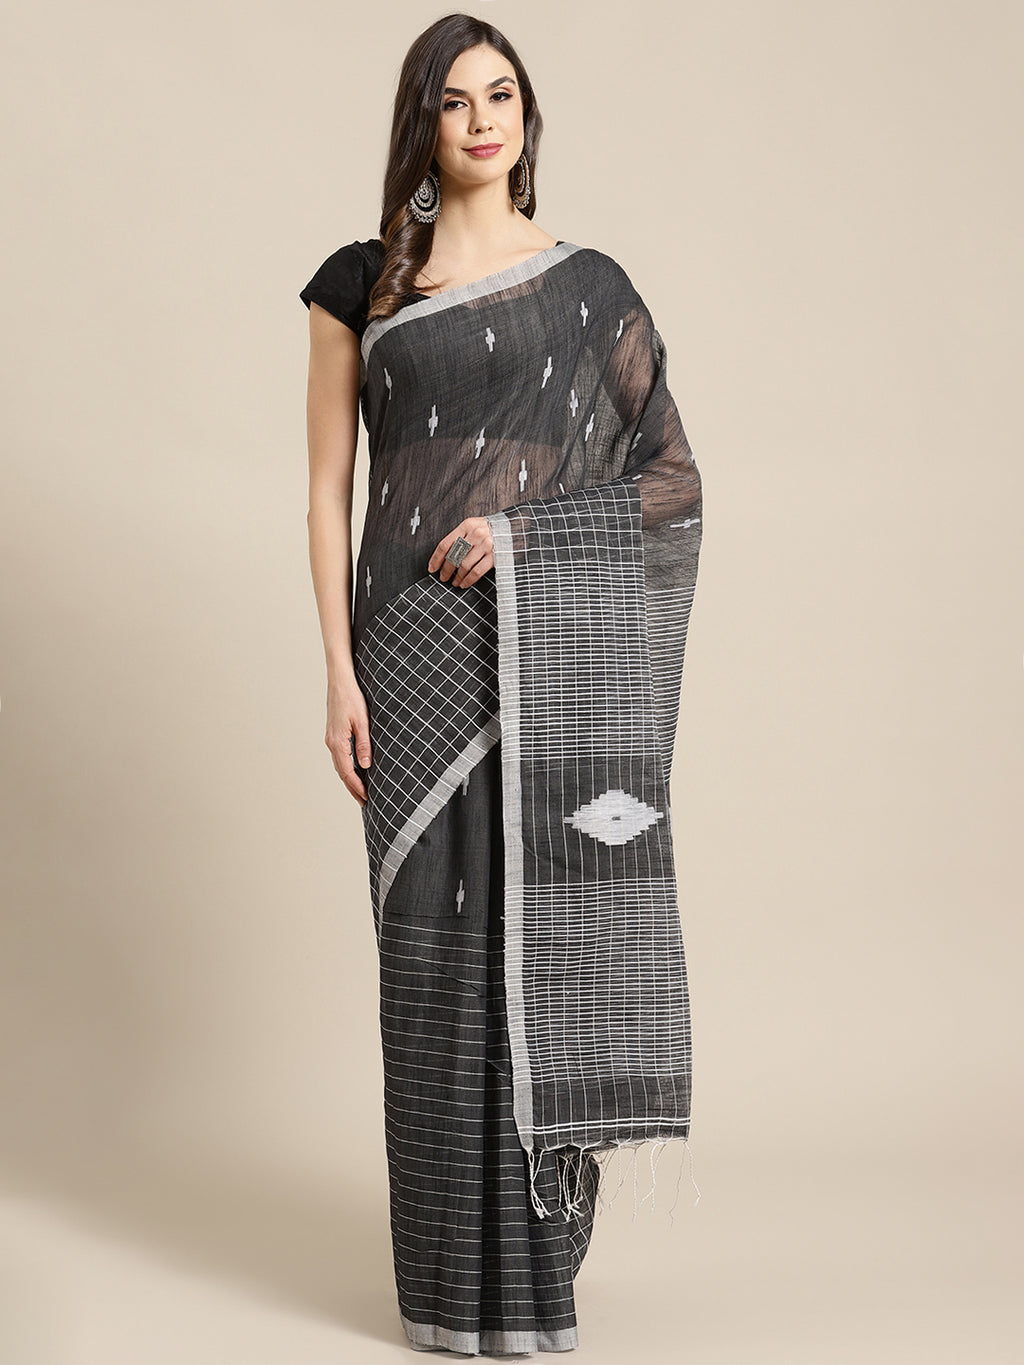 Grey and White, Kalakari India Ikat Silk Cotton Woven Design Saree with Blouse SHBESA0053-Saree-Kalakari India-SHBESA0053-Bengal, Cotton, Geographical Indication, Hand Crafted, Heritage Prints, Ikkat, Natural Dyes, Red, Sarees, Sustainable Fabrics, Woven, Yellow-[Linen,Ethnic,wear,Fashionista,Handloom,Handicraft,Indigo,blockprint,block,print,Cotton,Chanderi,Blue, latest,classy,party,bollywood,trendy,summer,style,traditional,formal,elegant,unique,style,hand,block,print, dabu,booti,gift,present,gl